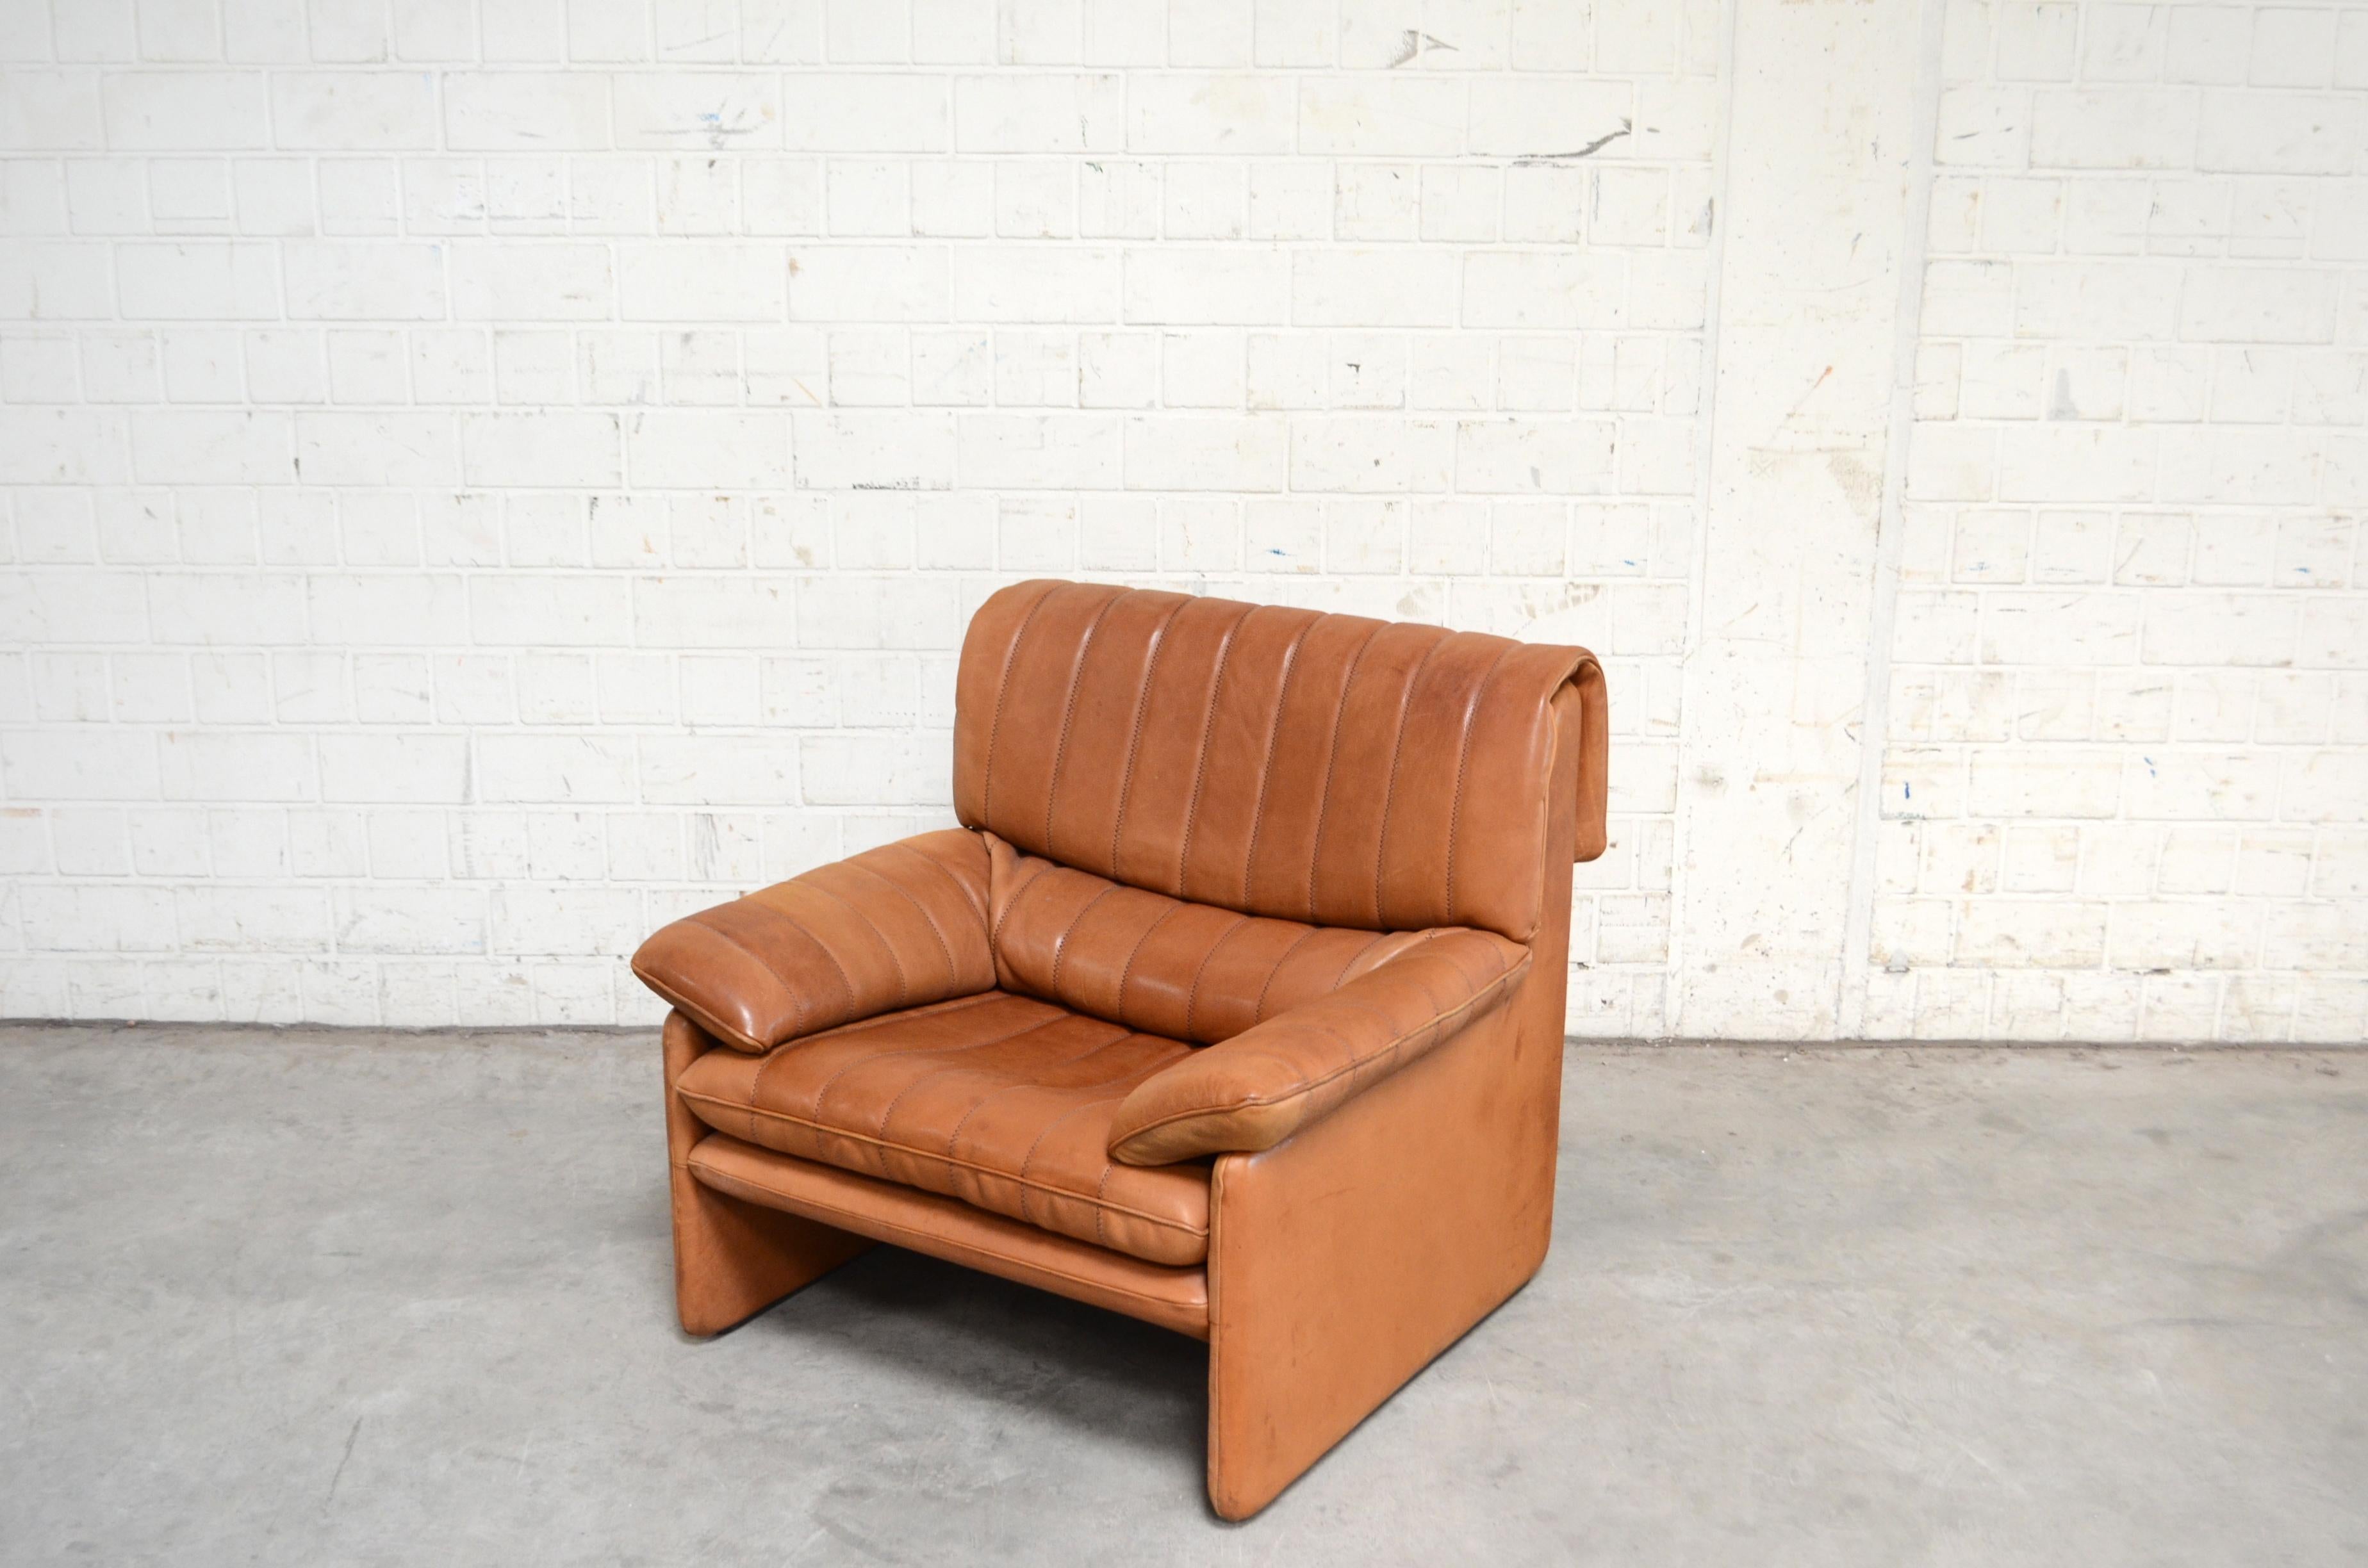 Vintage leather Armchair by De Sede.
Model Ds 86.
Thick neck leather with beautiful cognac color.
Great comfort.
With patina. On the left side the leather color is faded also the back.
De Sede is a Switzerland furniture company that creates